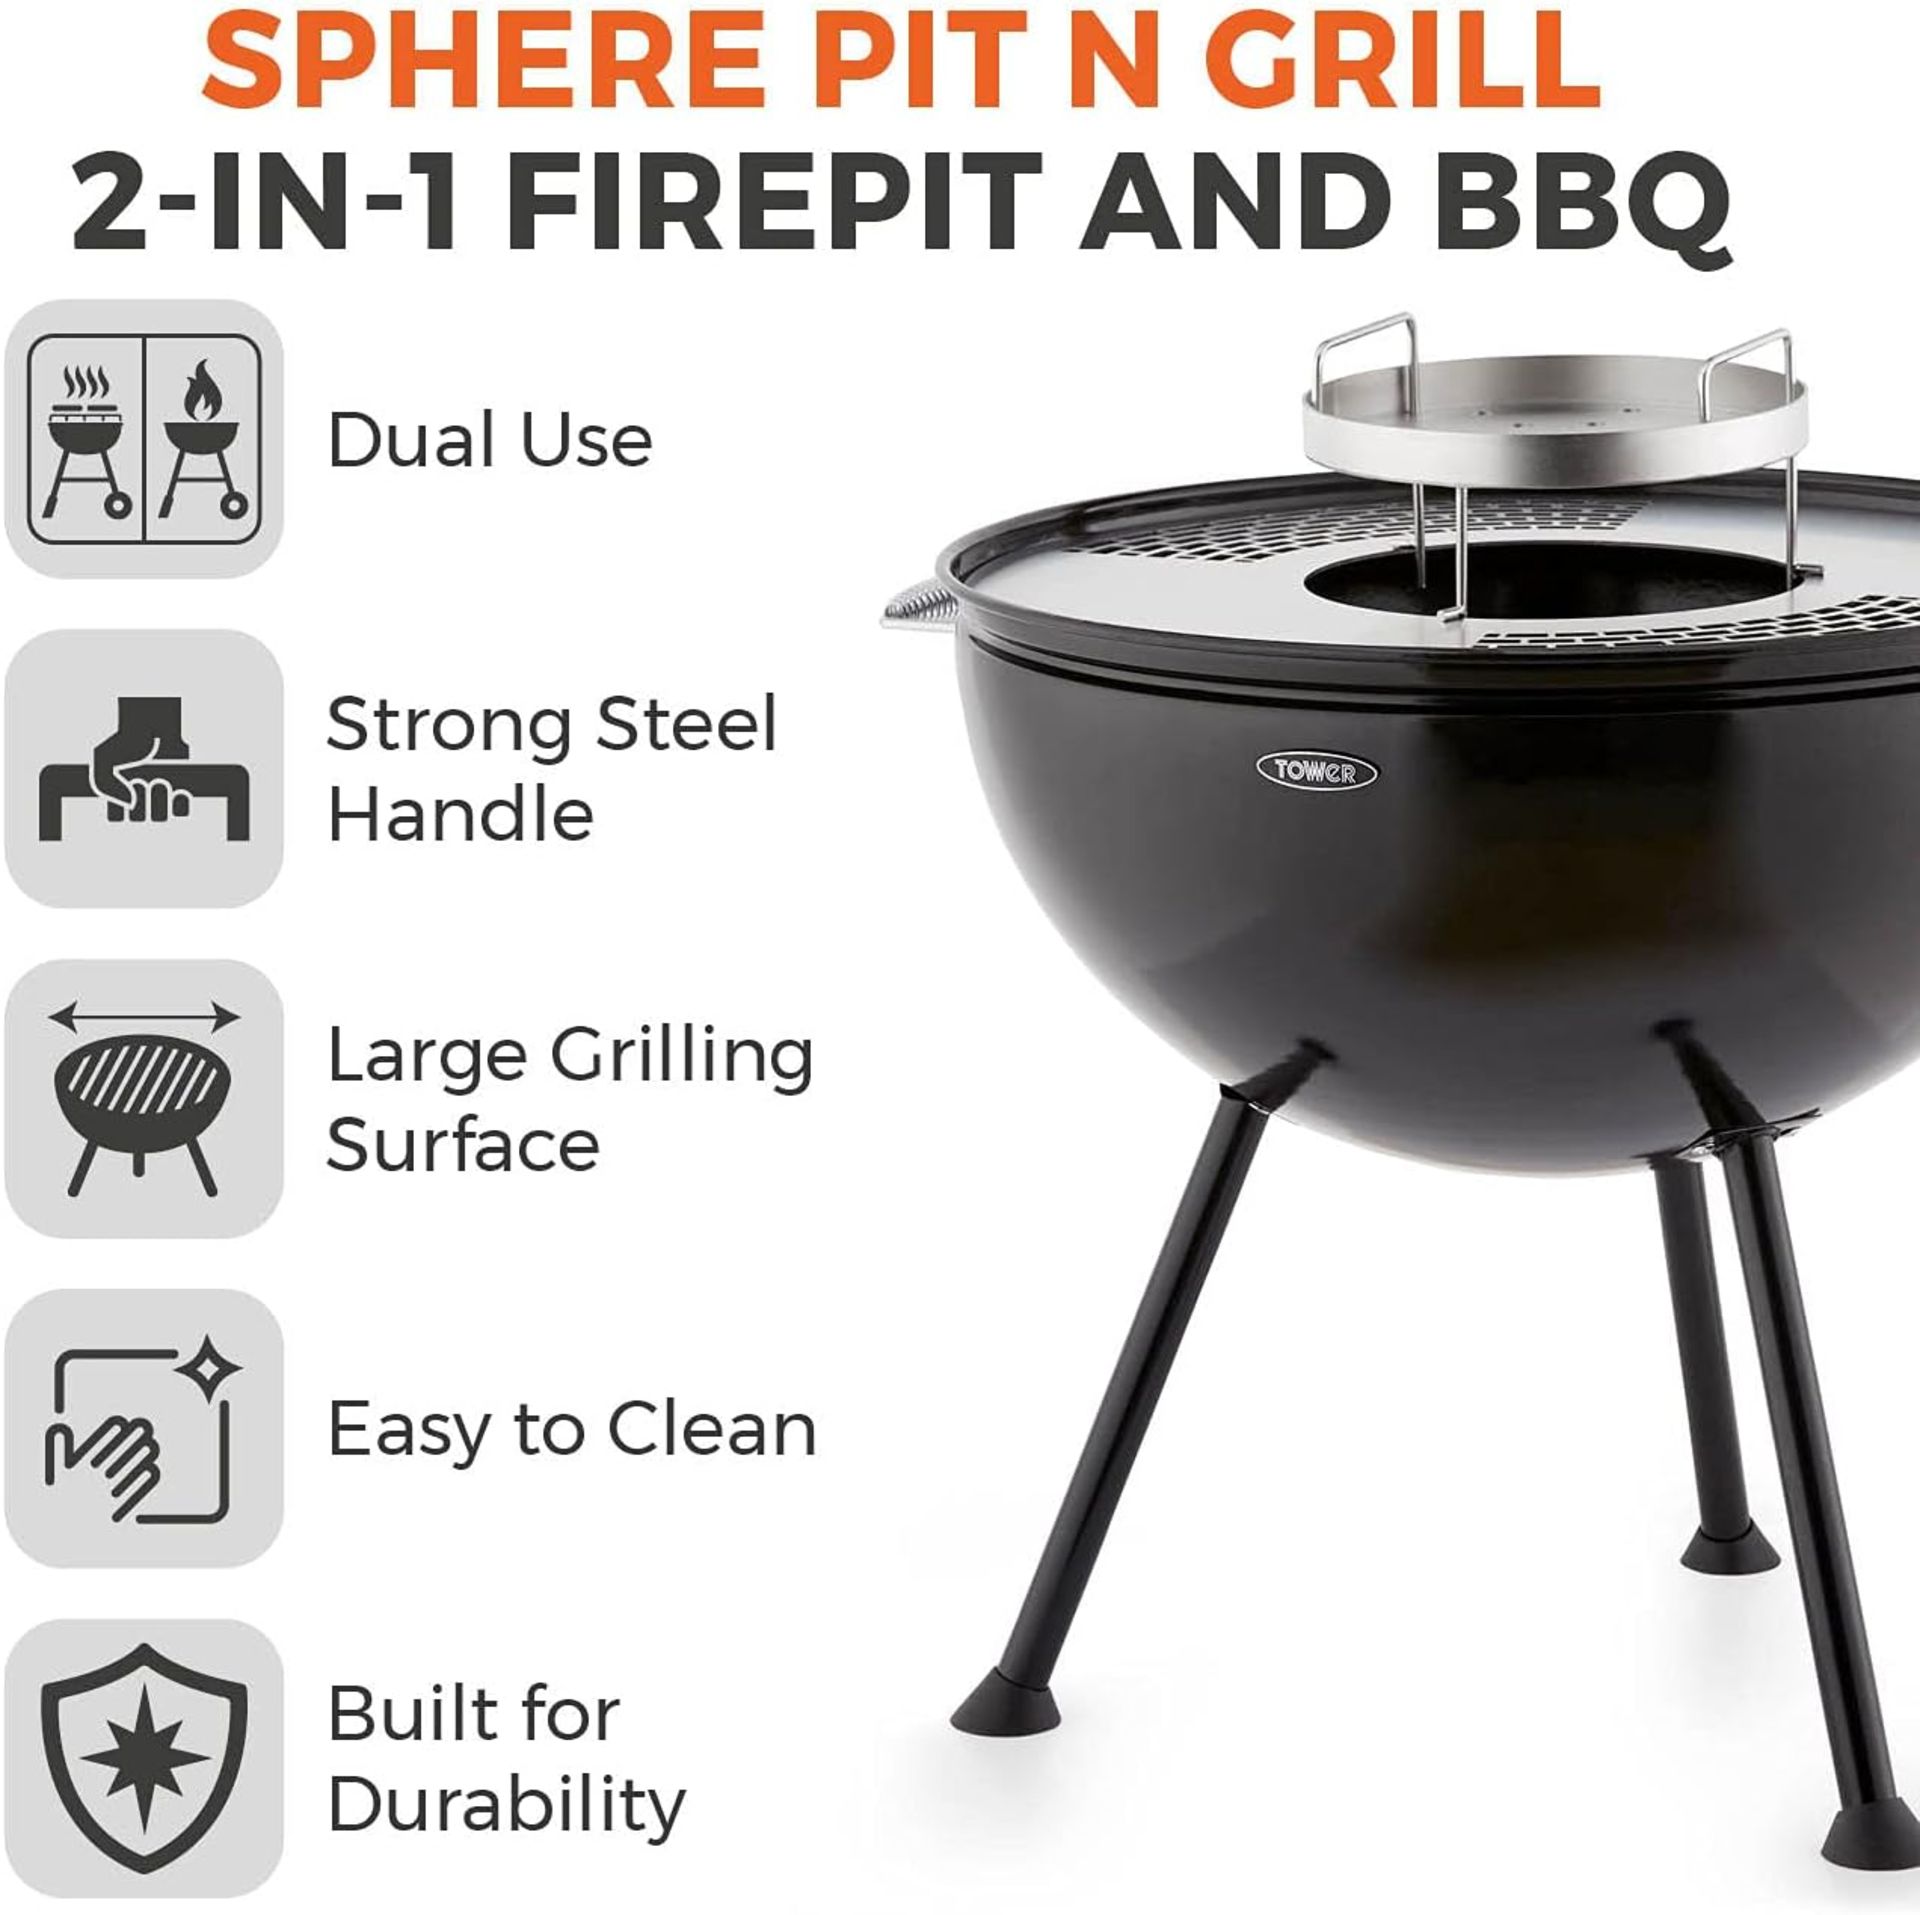 BRAND NEW Tower 2-in-1 Fire Pit and BBQ. RRP £159.99 EACH. Combining visual appeal and - Image 4 of 4